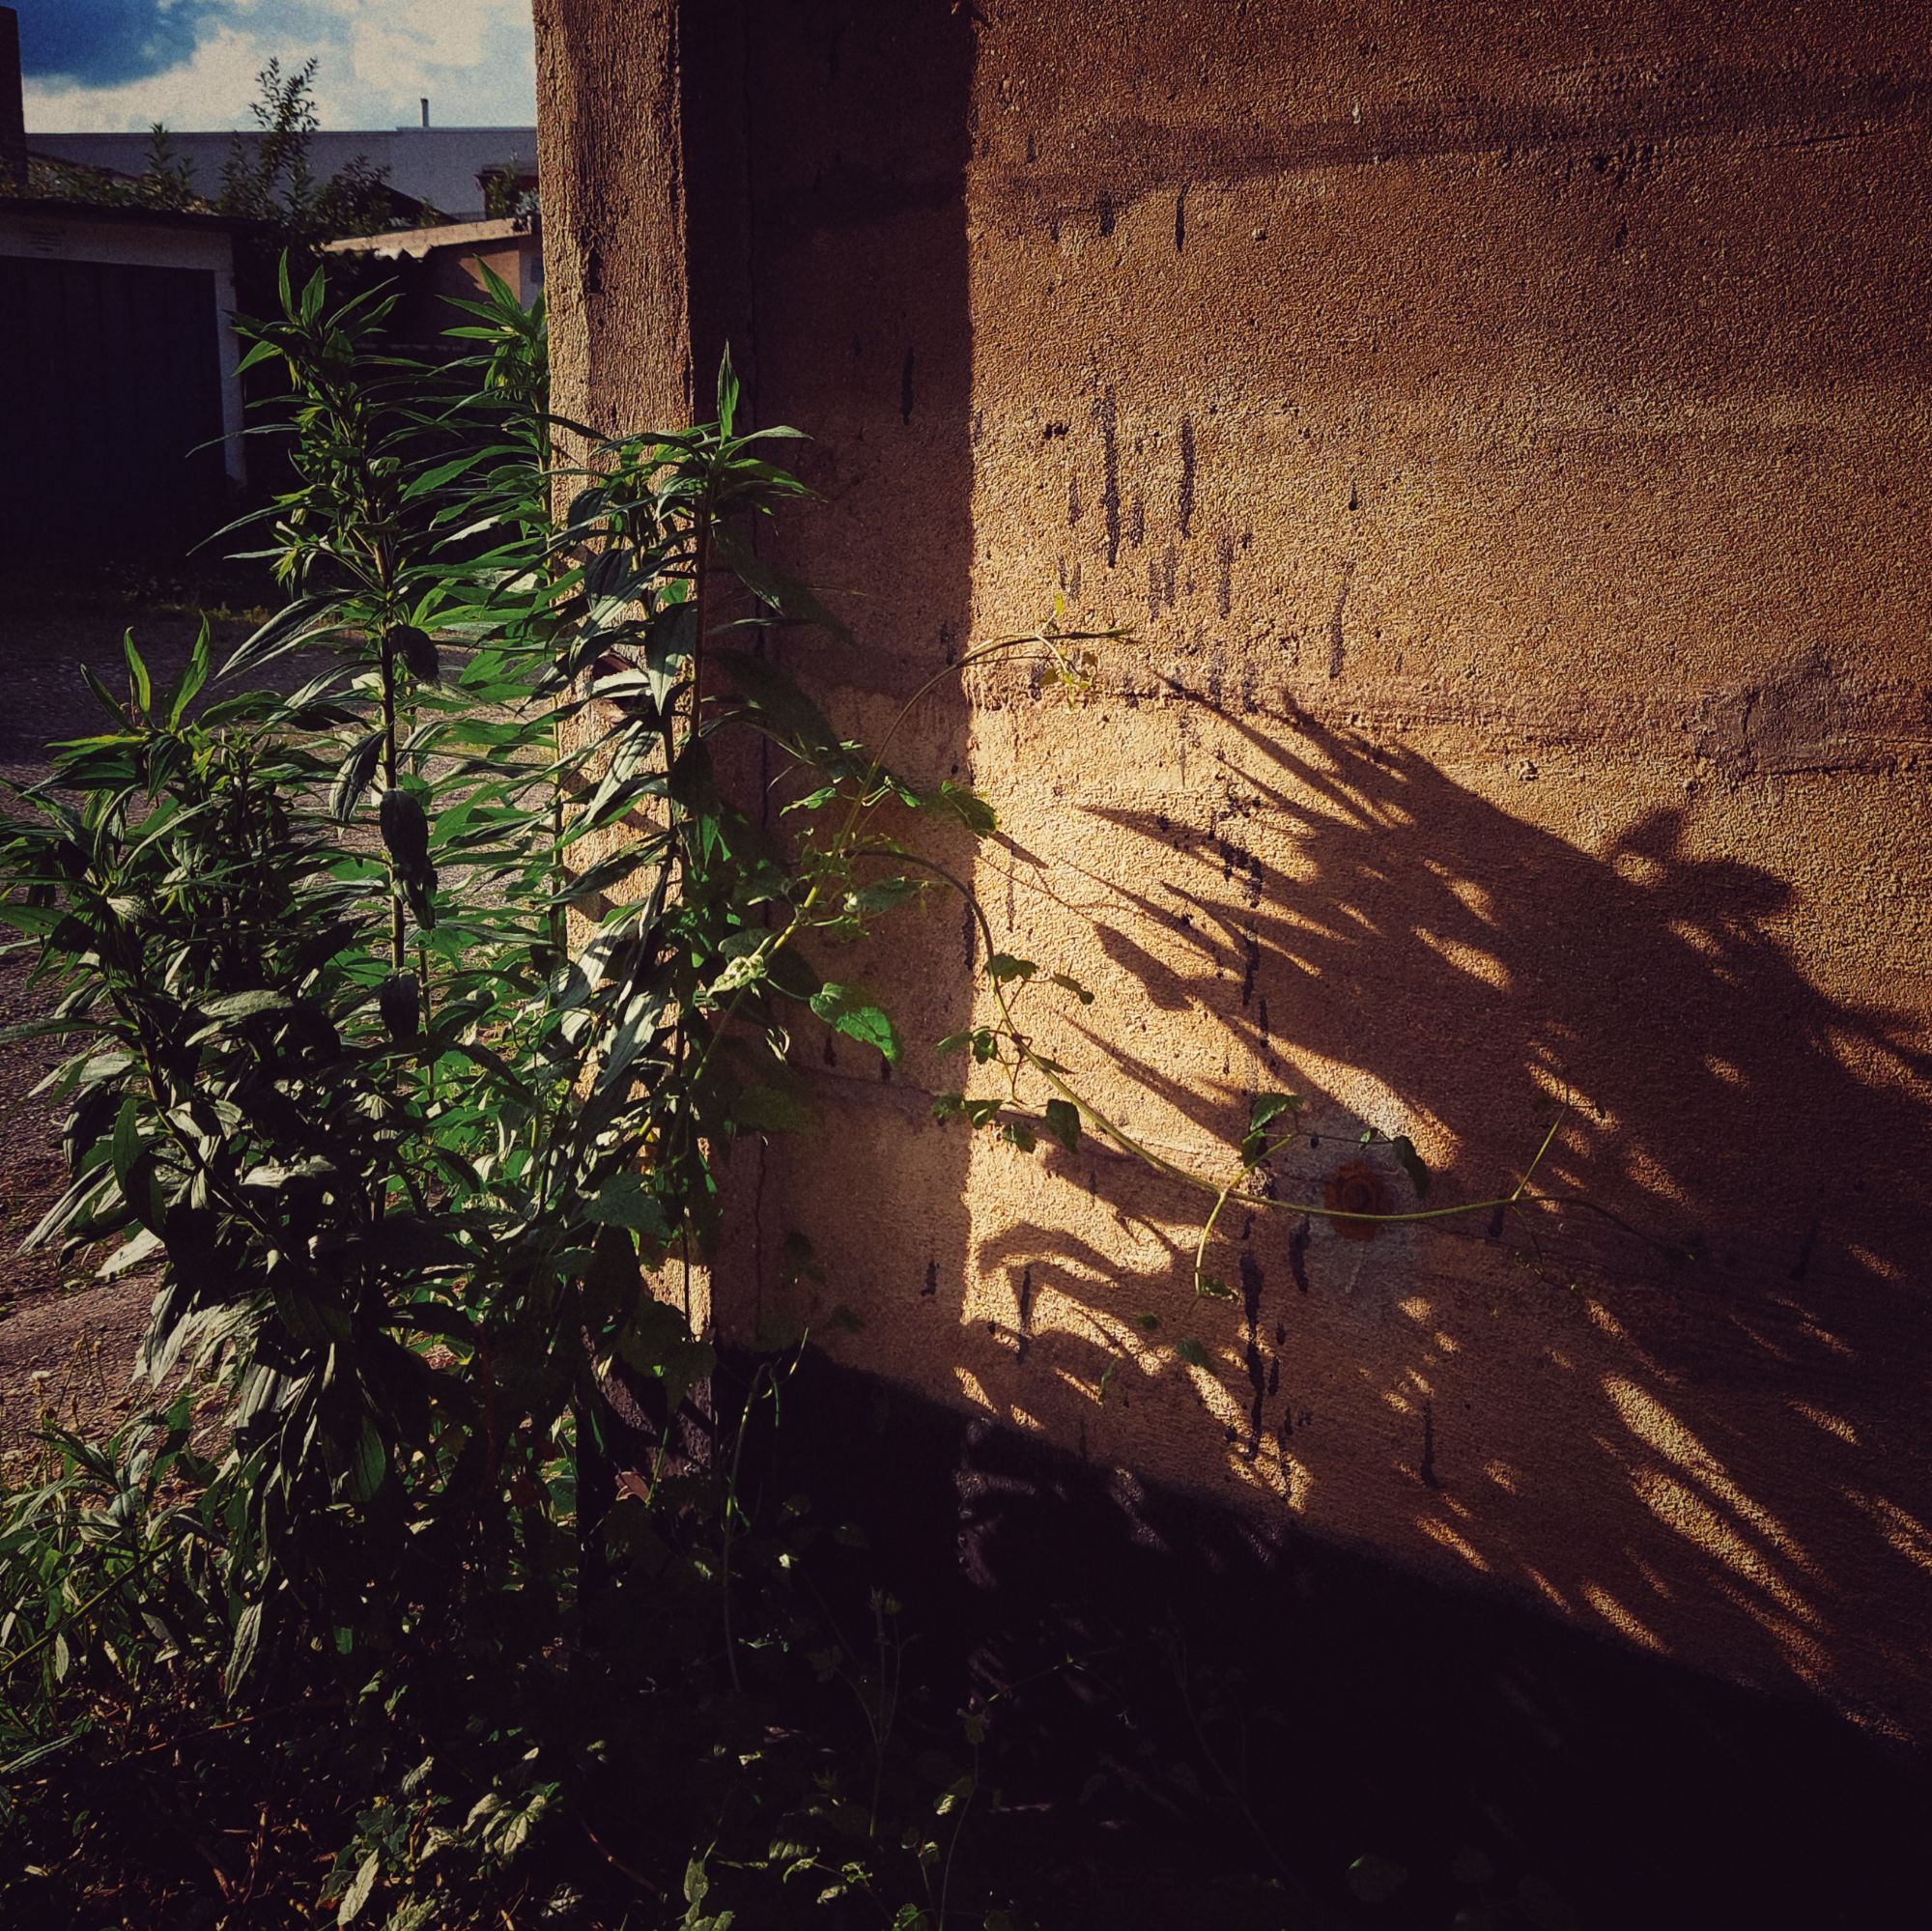 Sundown mood and light, a plant behind the corner of a house, casting sharp shadows on a brute concrete wall.